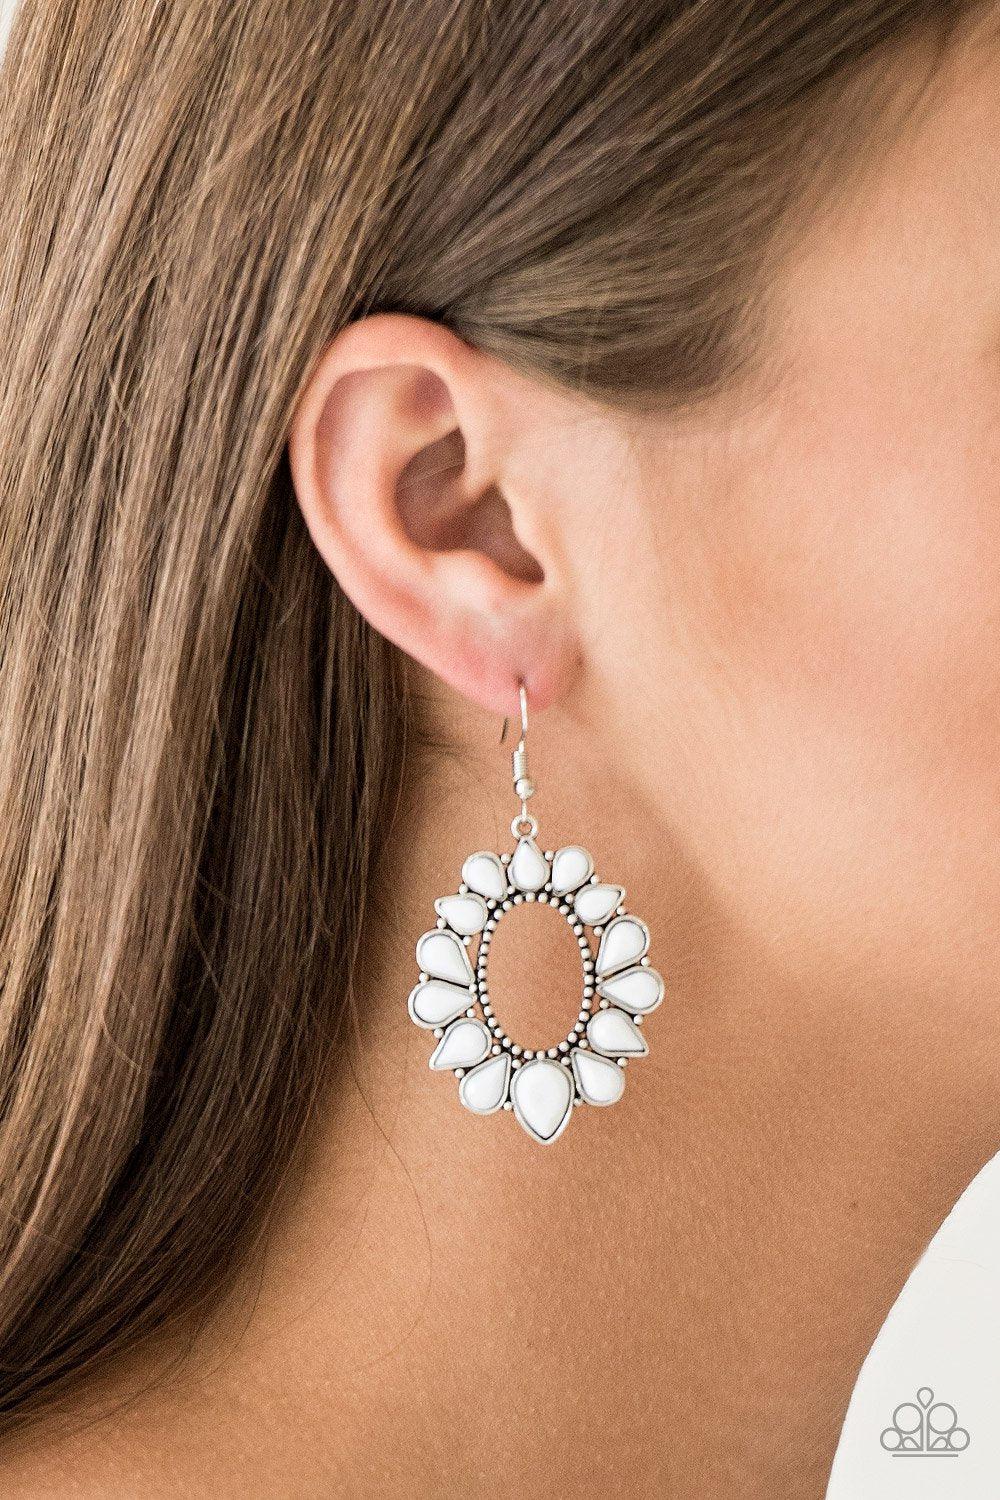 Fashionista Flavor White Earrings - Paparazzi Accessories-CarasShop.com - $5 Jewelry by Cara Jewels